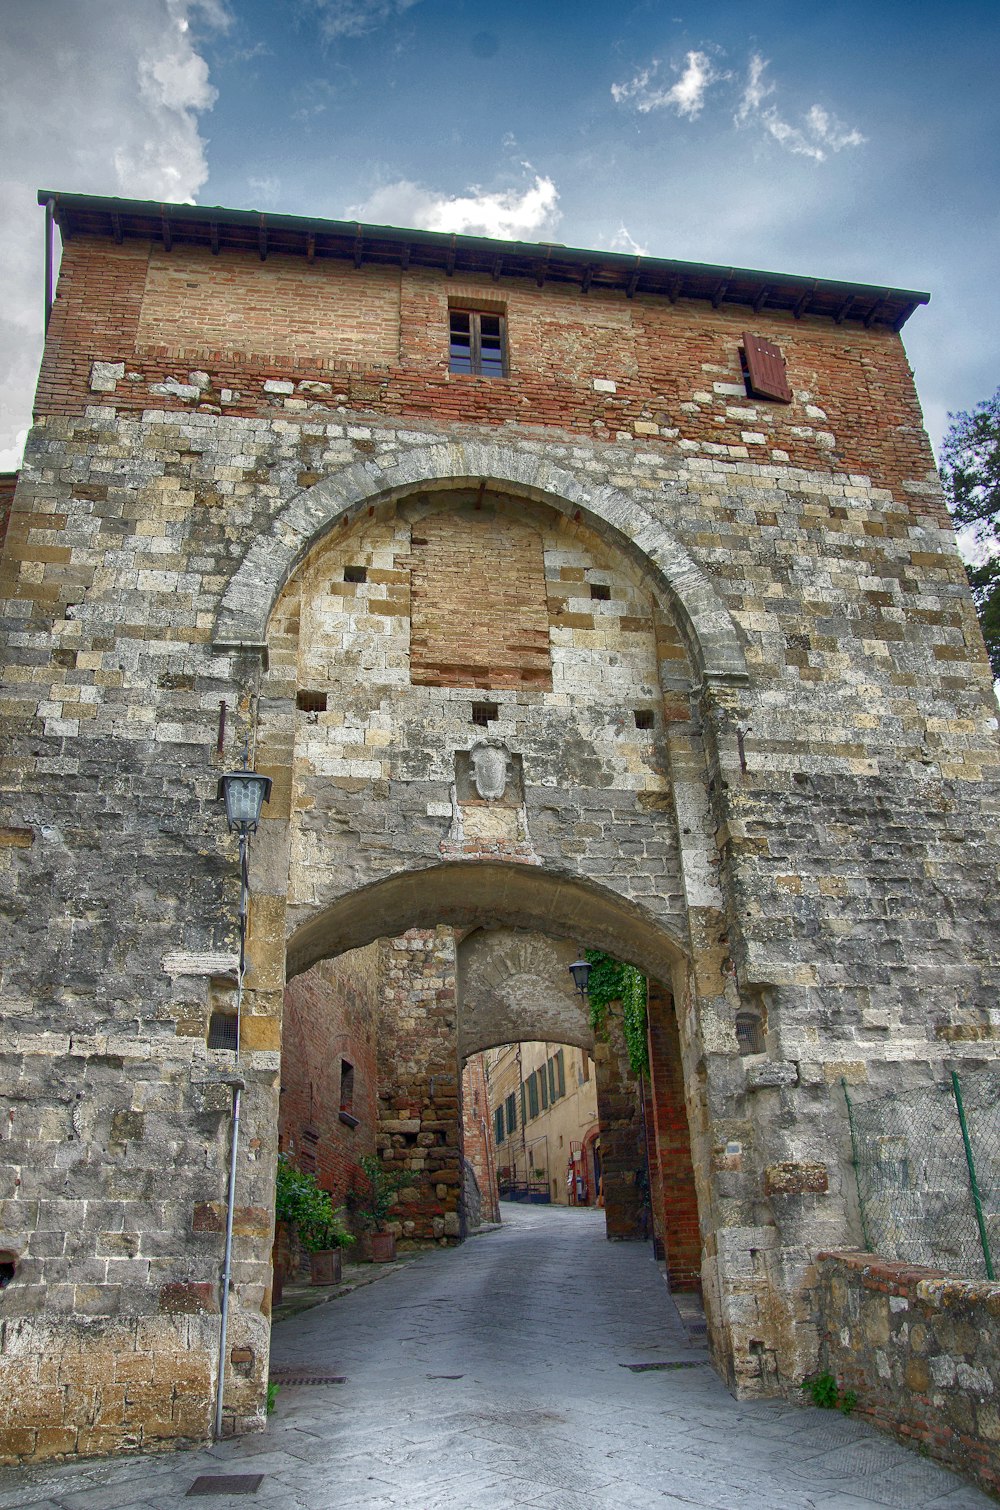 an old brick building with an arched doorway